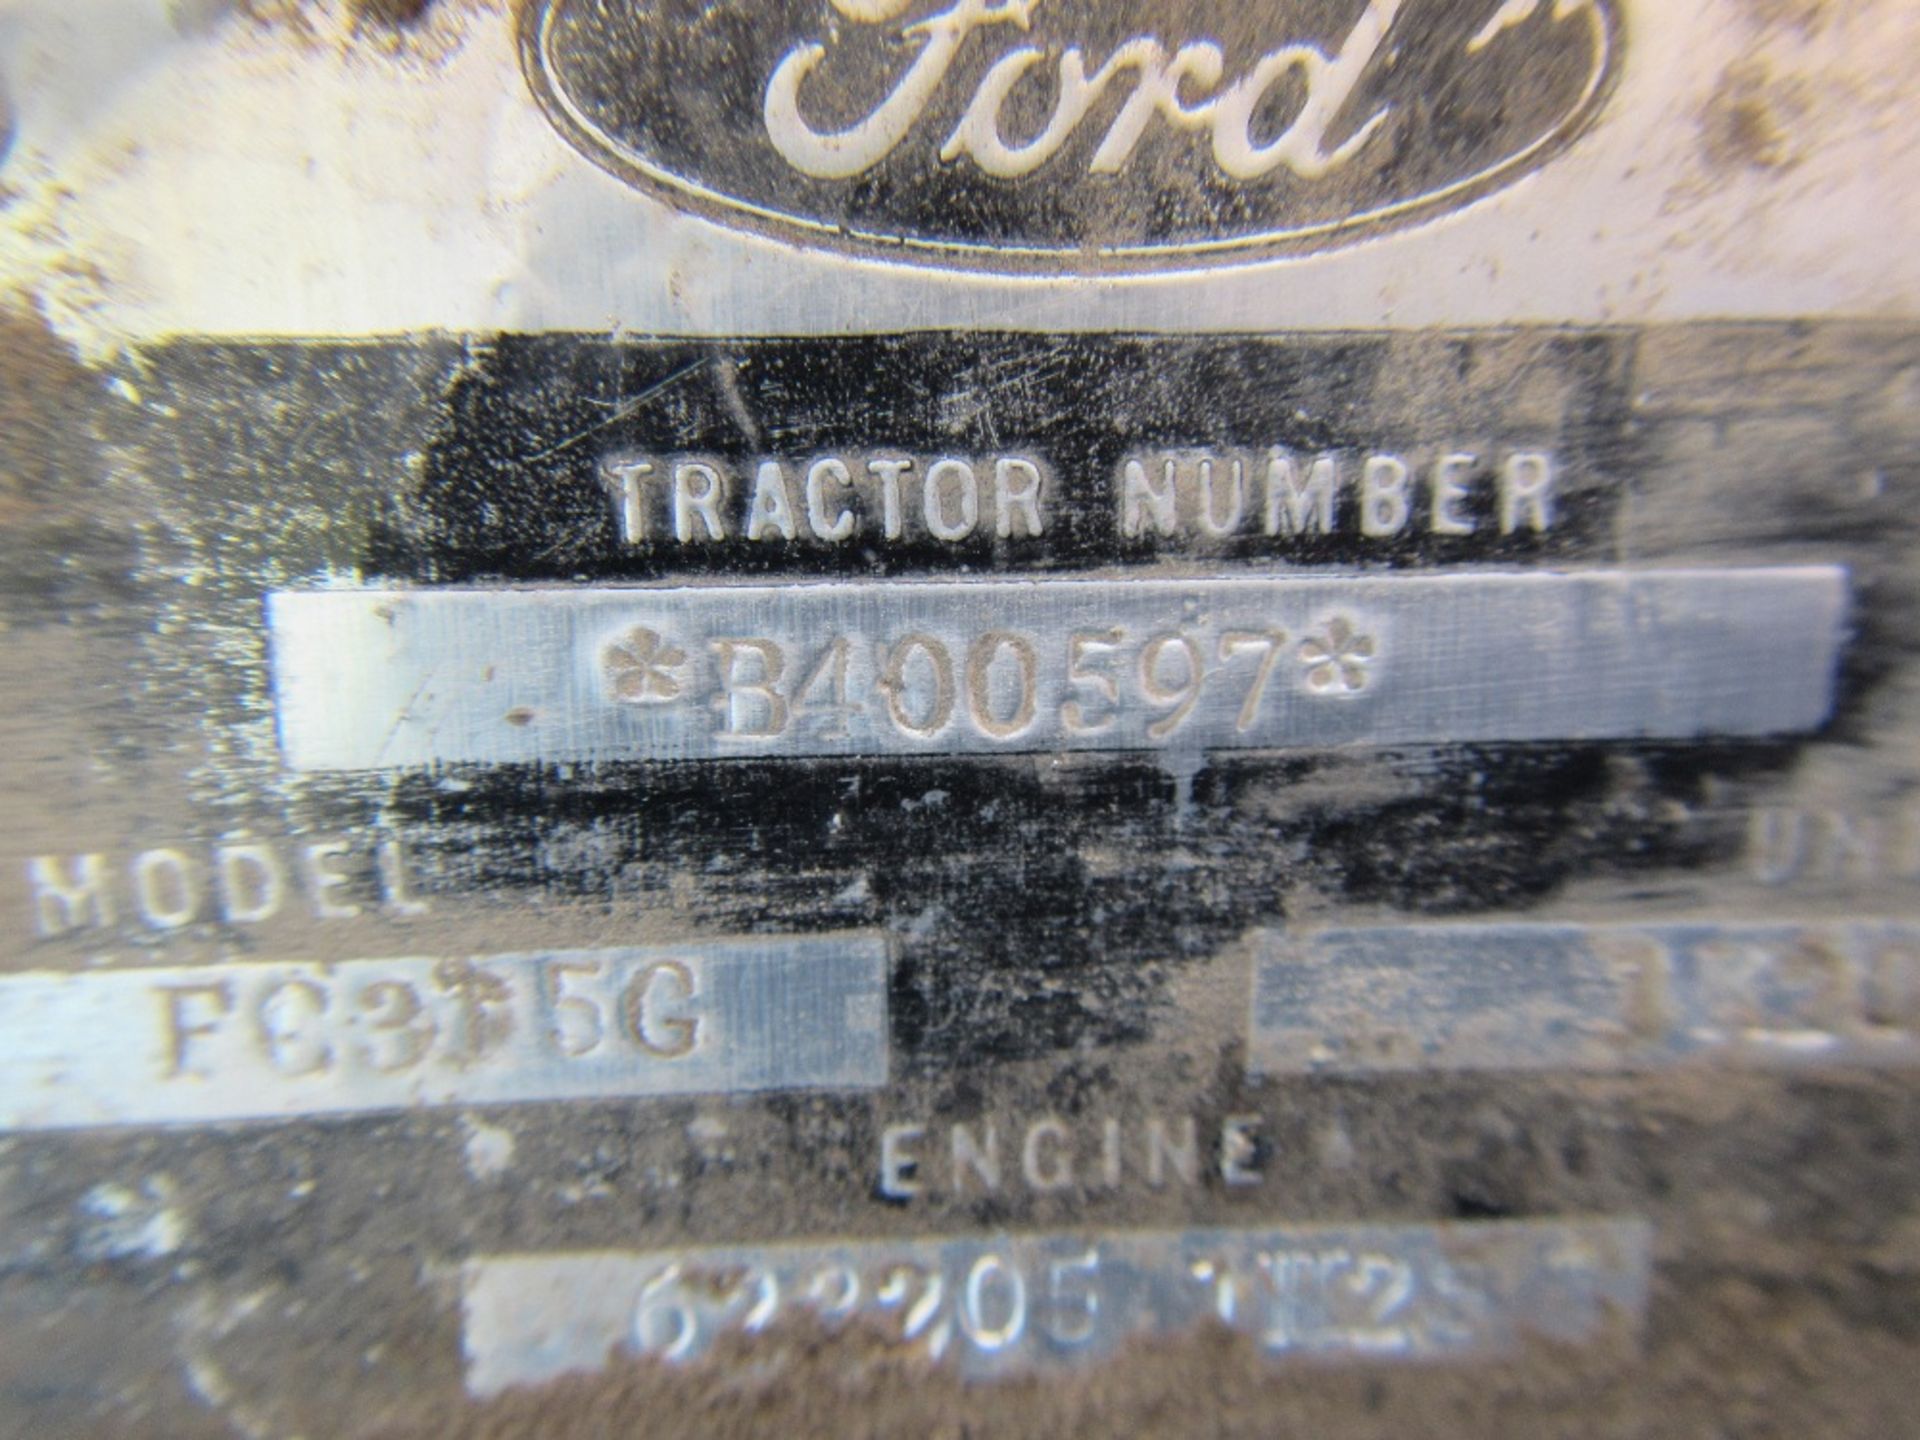 Ford 7710 2wd Tractor Ser. No. B400597 - Image 17 of 18